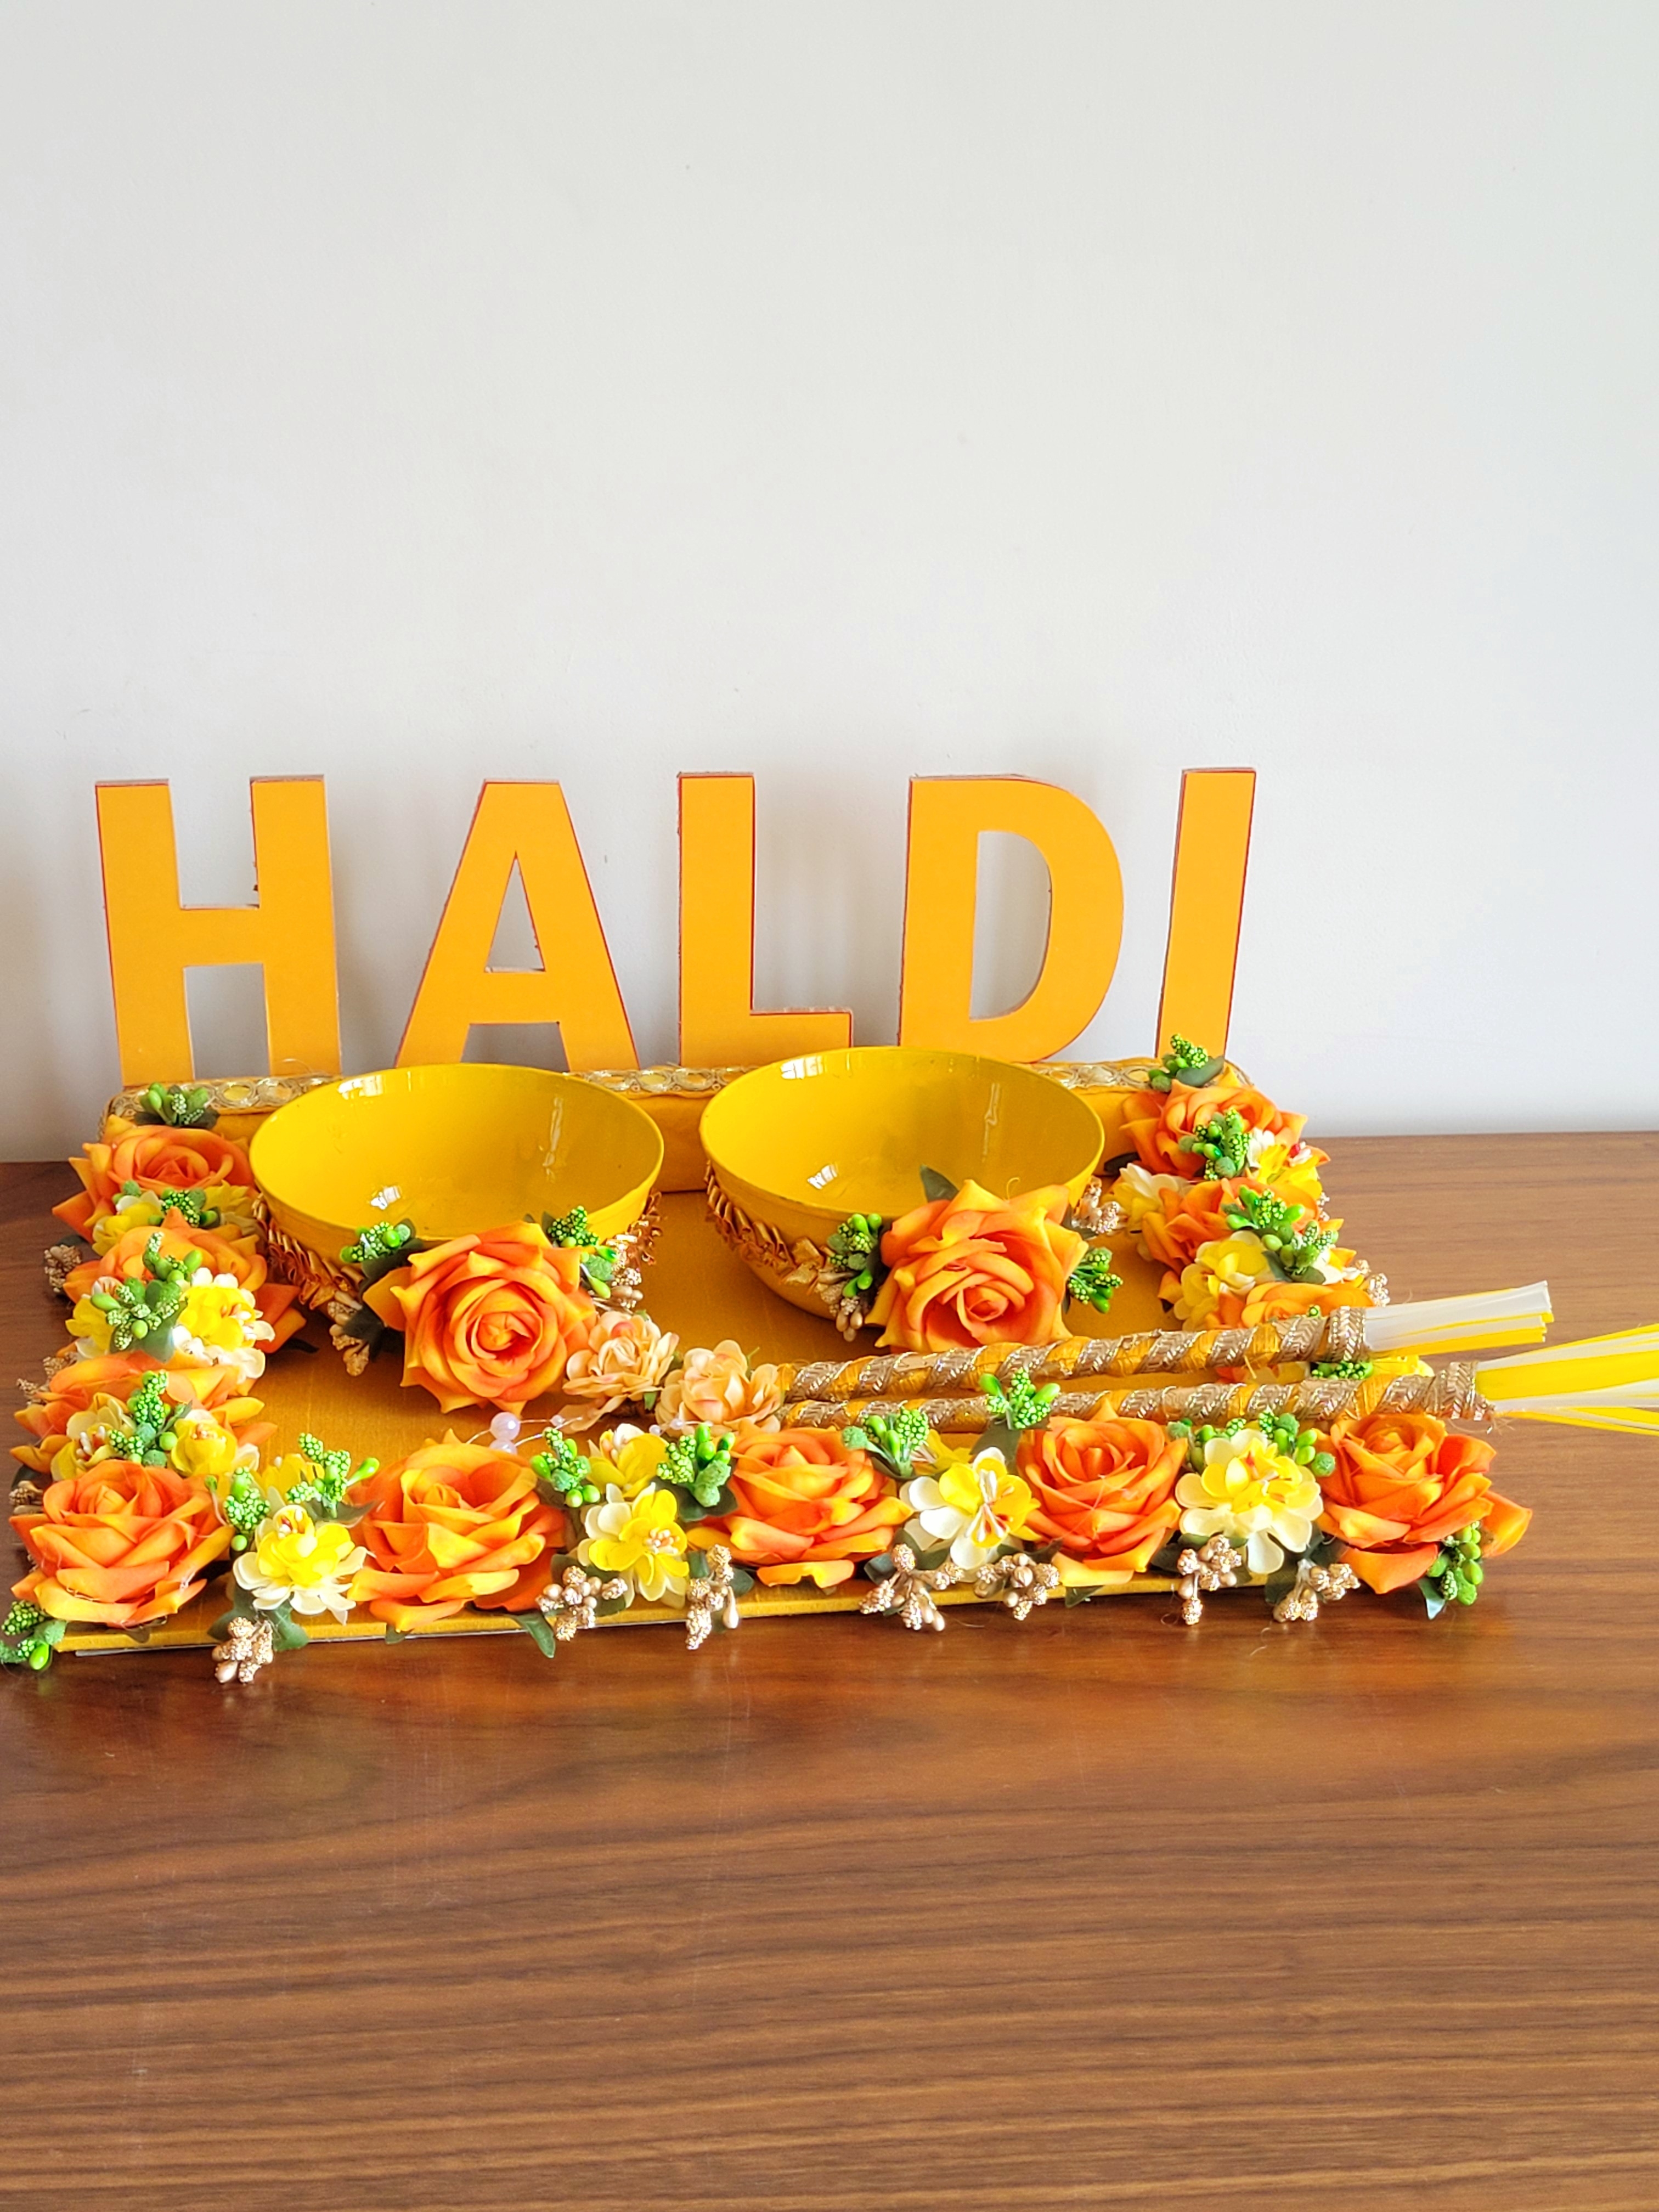 Floral art | Yellow Haldi Platter with Artificial flower border undefined